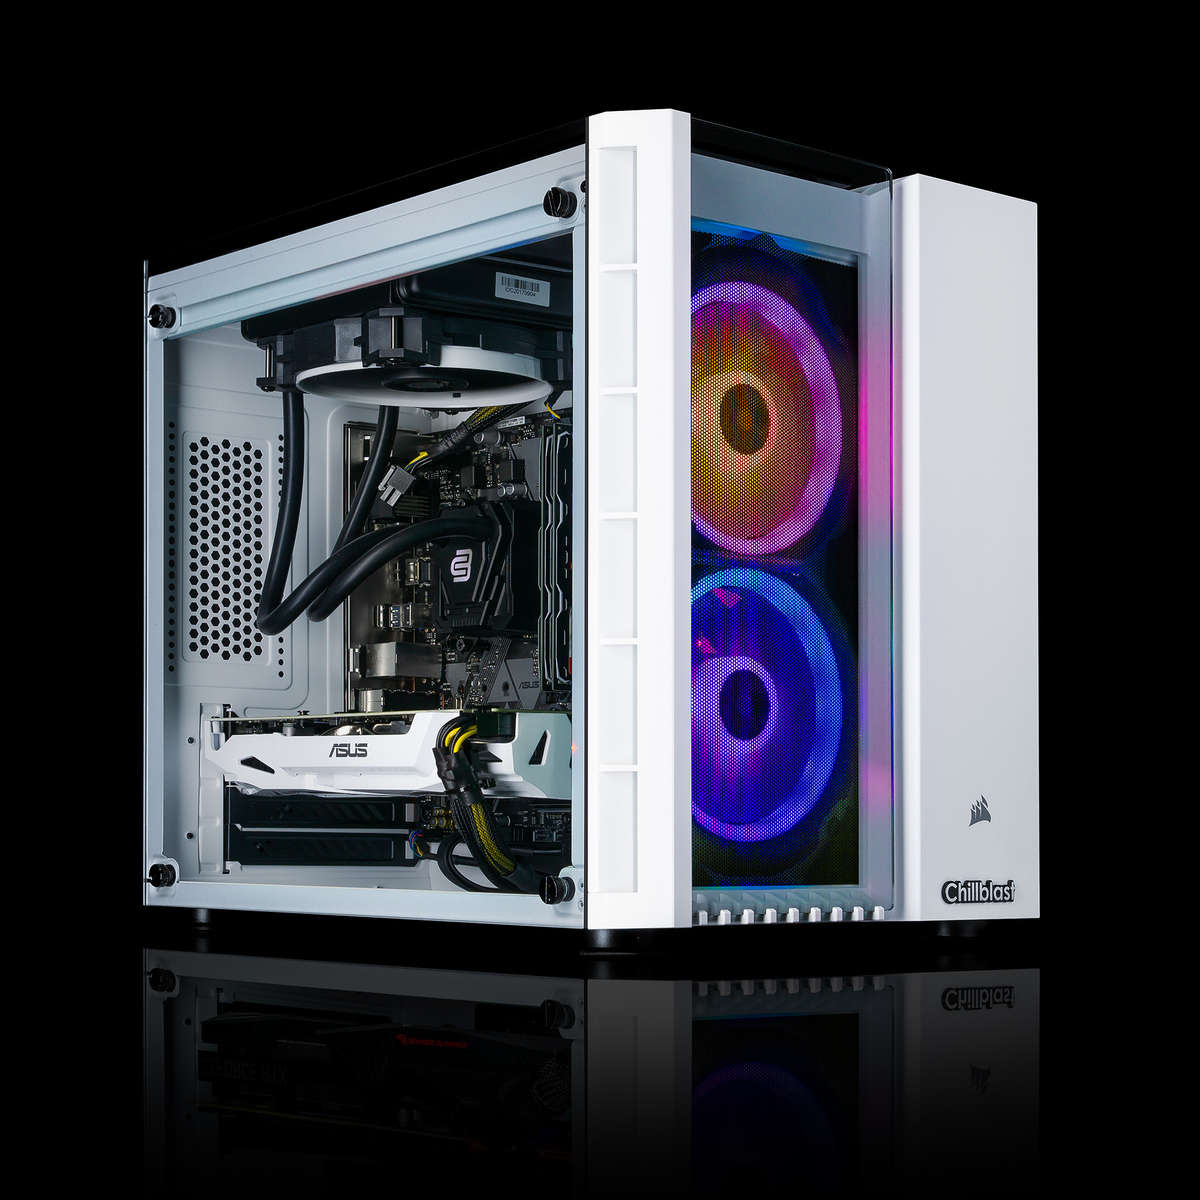 Image of the Chillblast Fusion Crystal Lite GTX 1660 Super Gaming PC